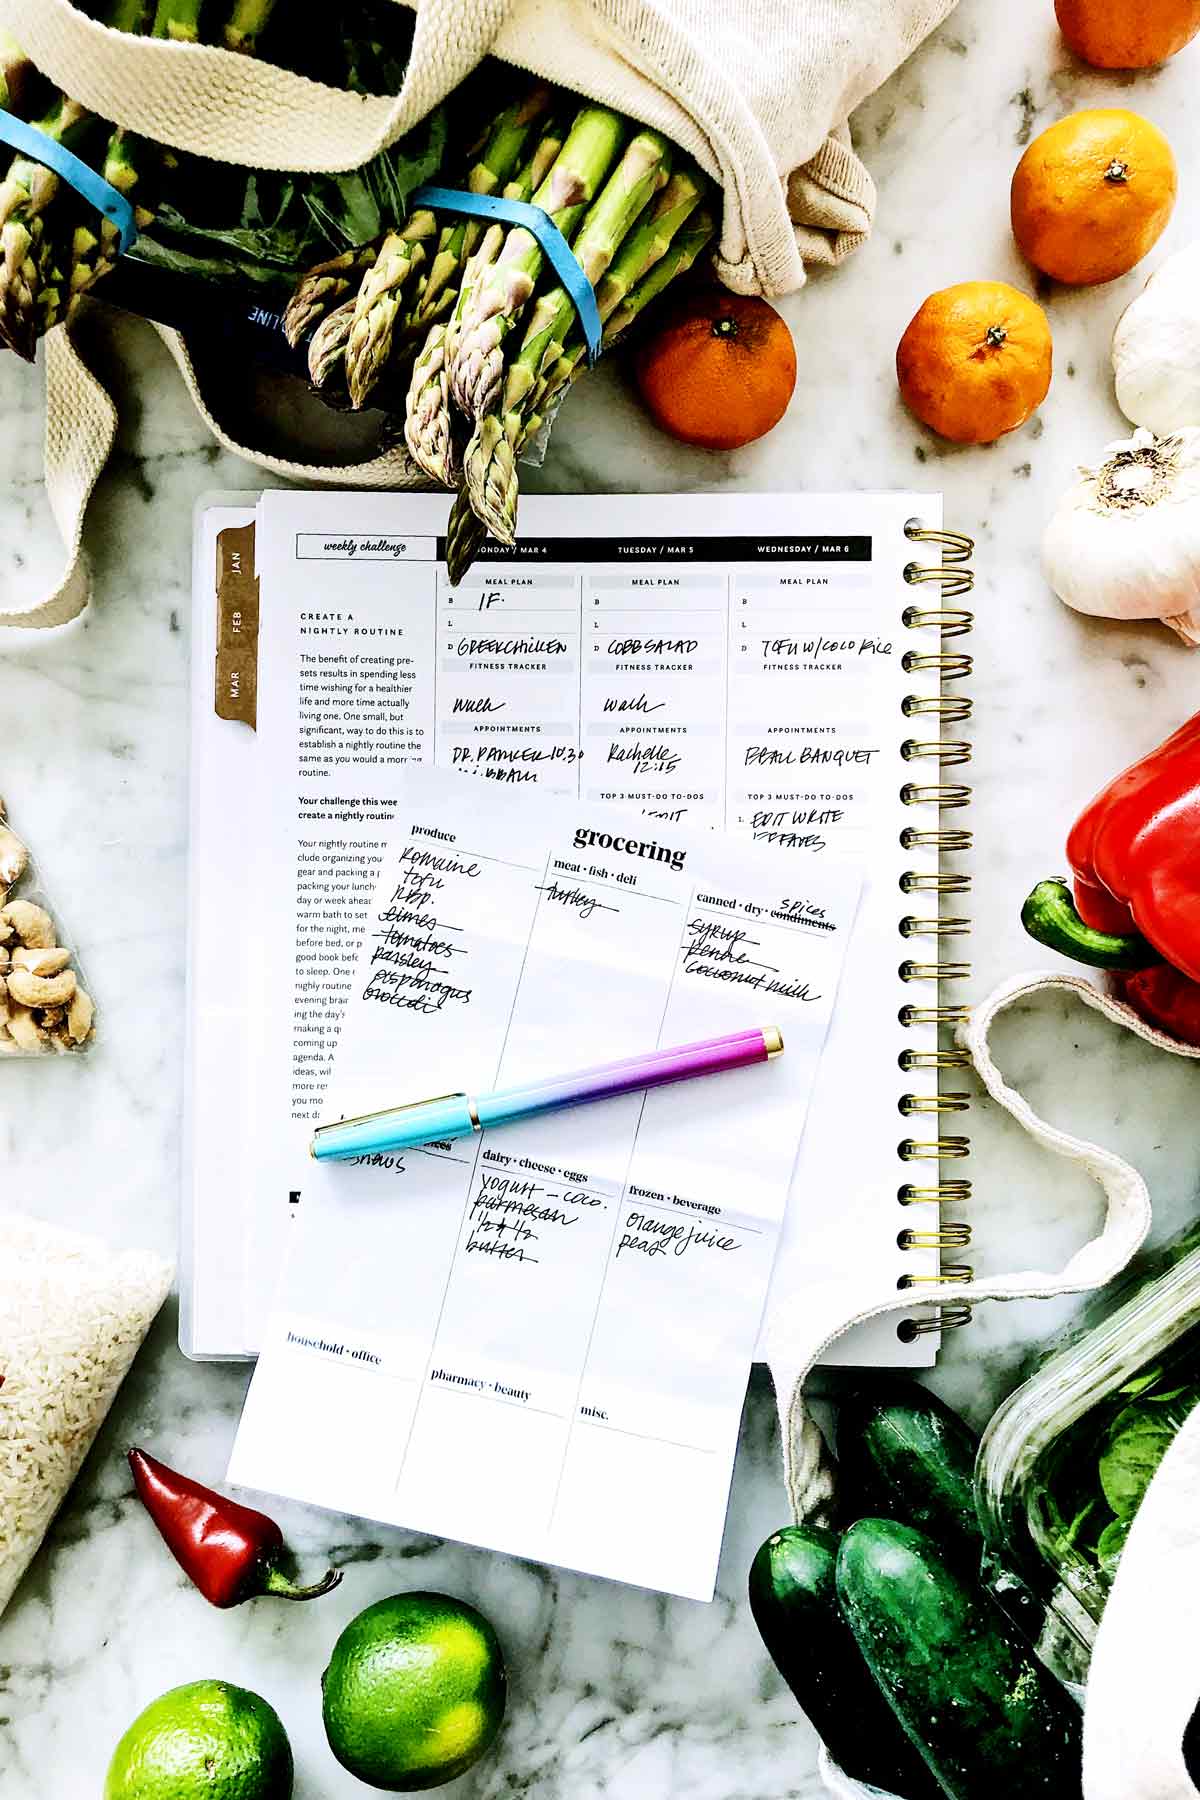 27 Ways to Save More Money at the Grocery Store - foodiecrush .com